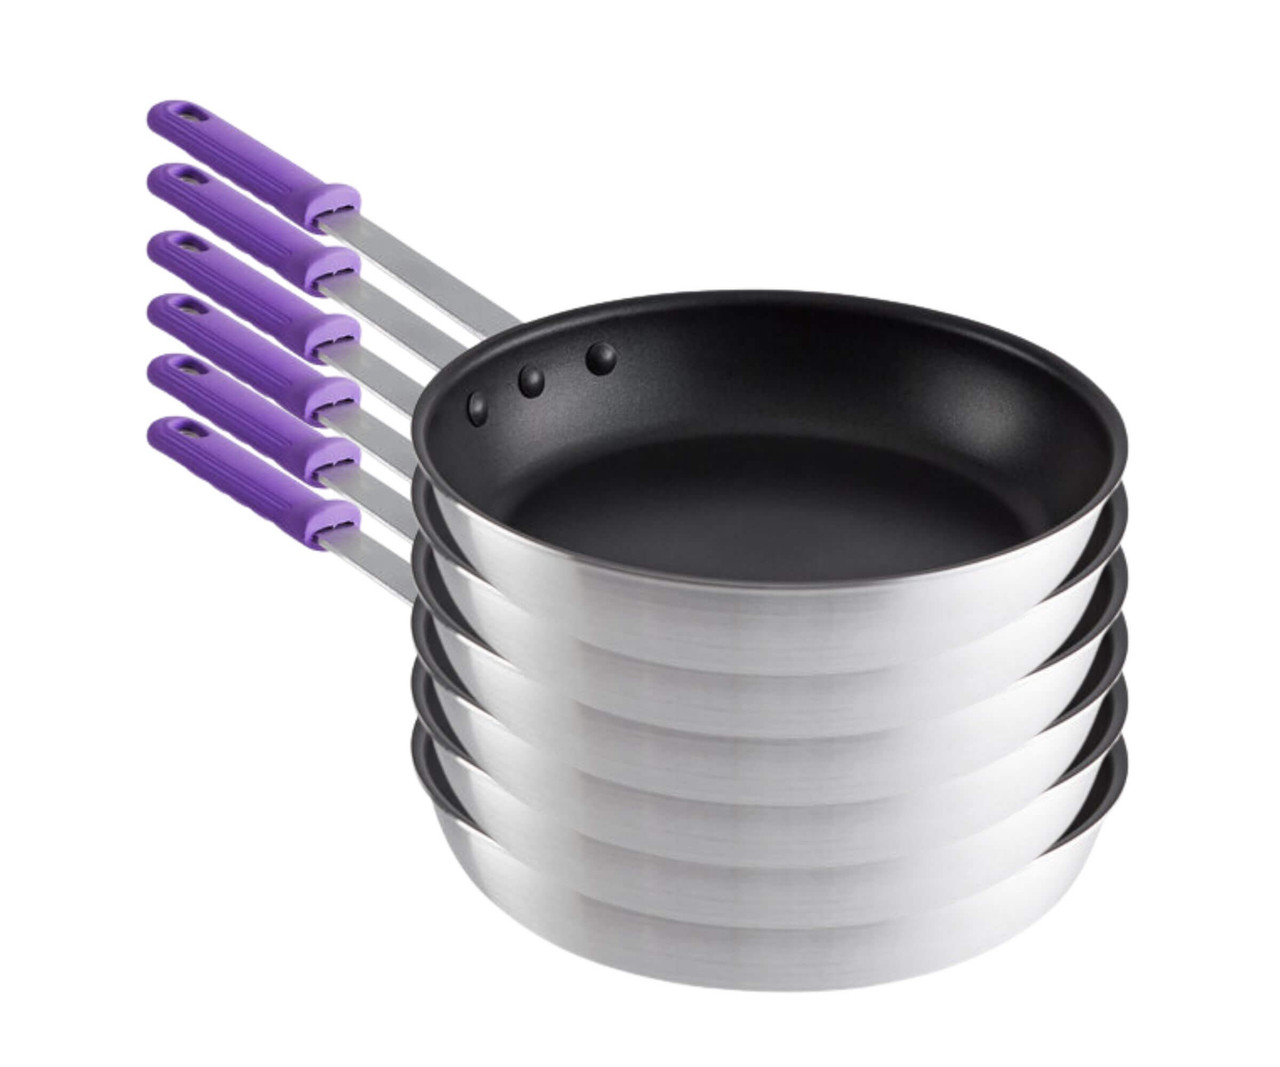 Choice 8 Aluminum Non-Stick Fry Pan with Purple Allergen-Free Silicone  Handle